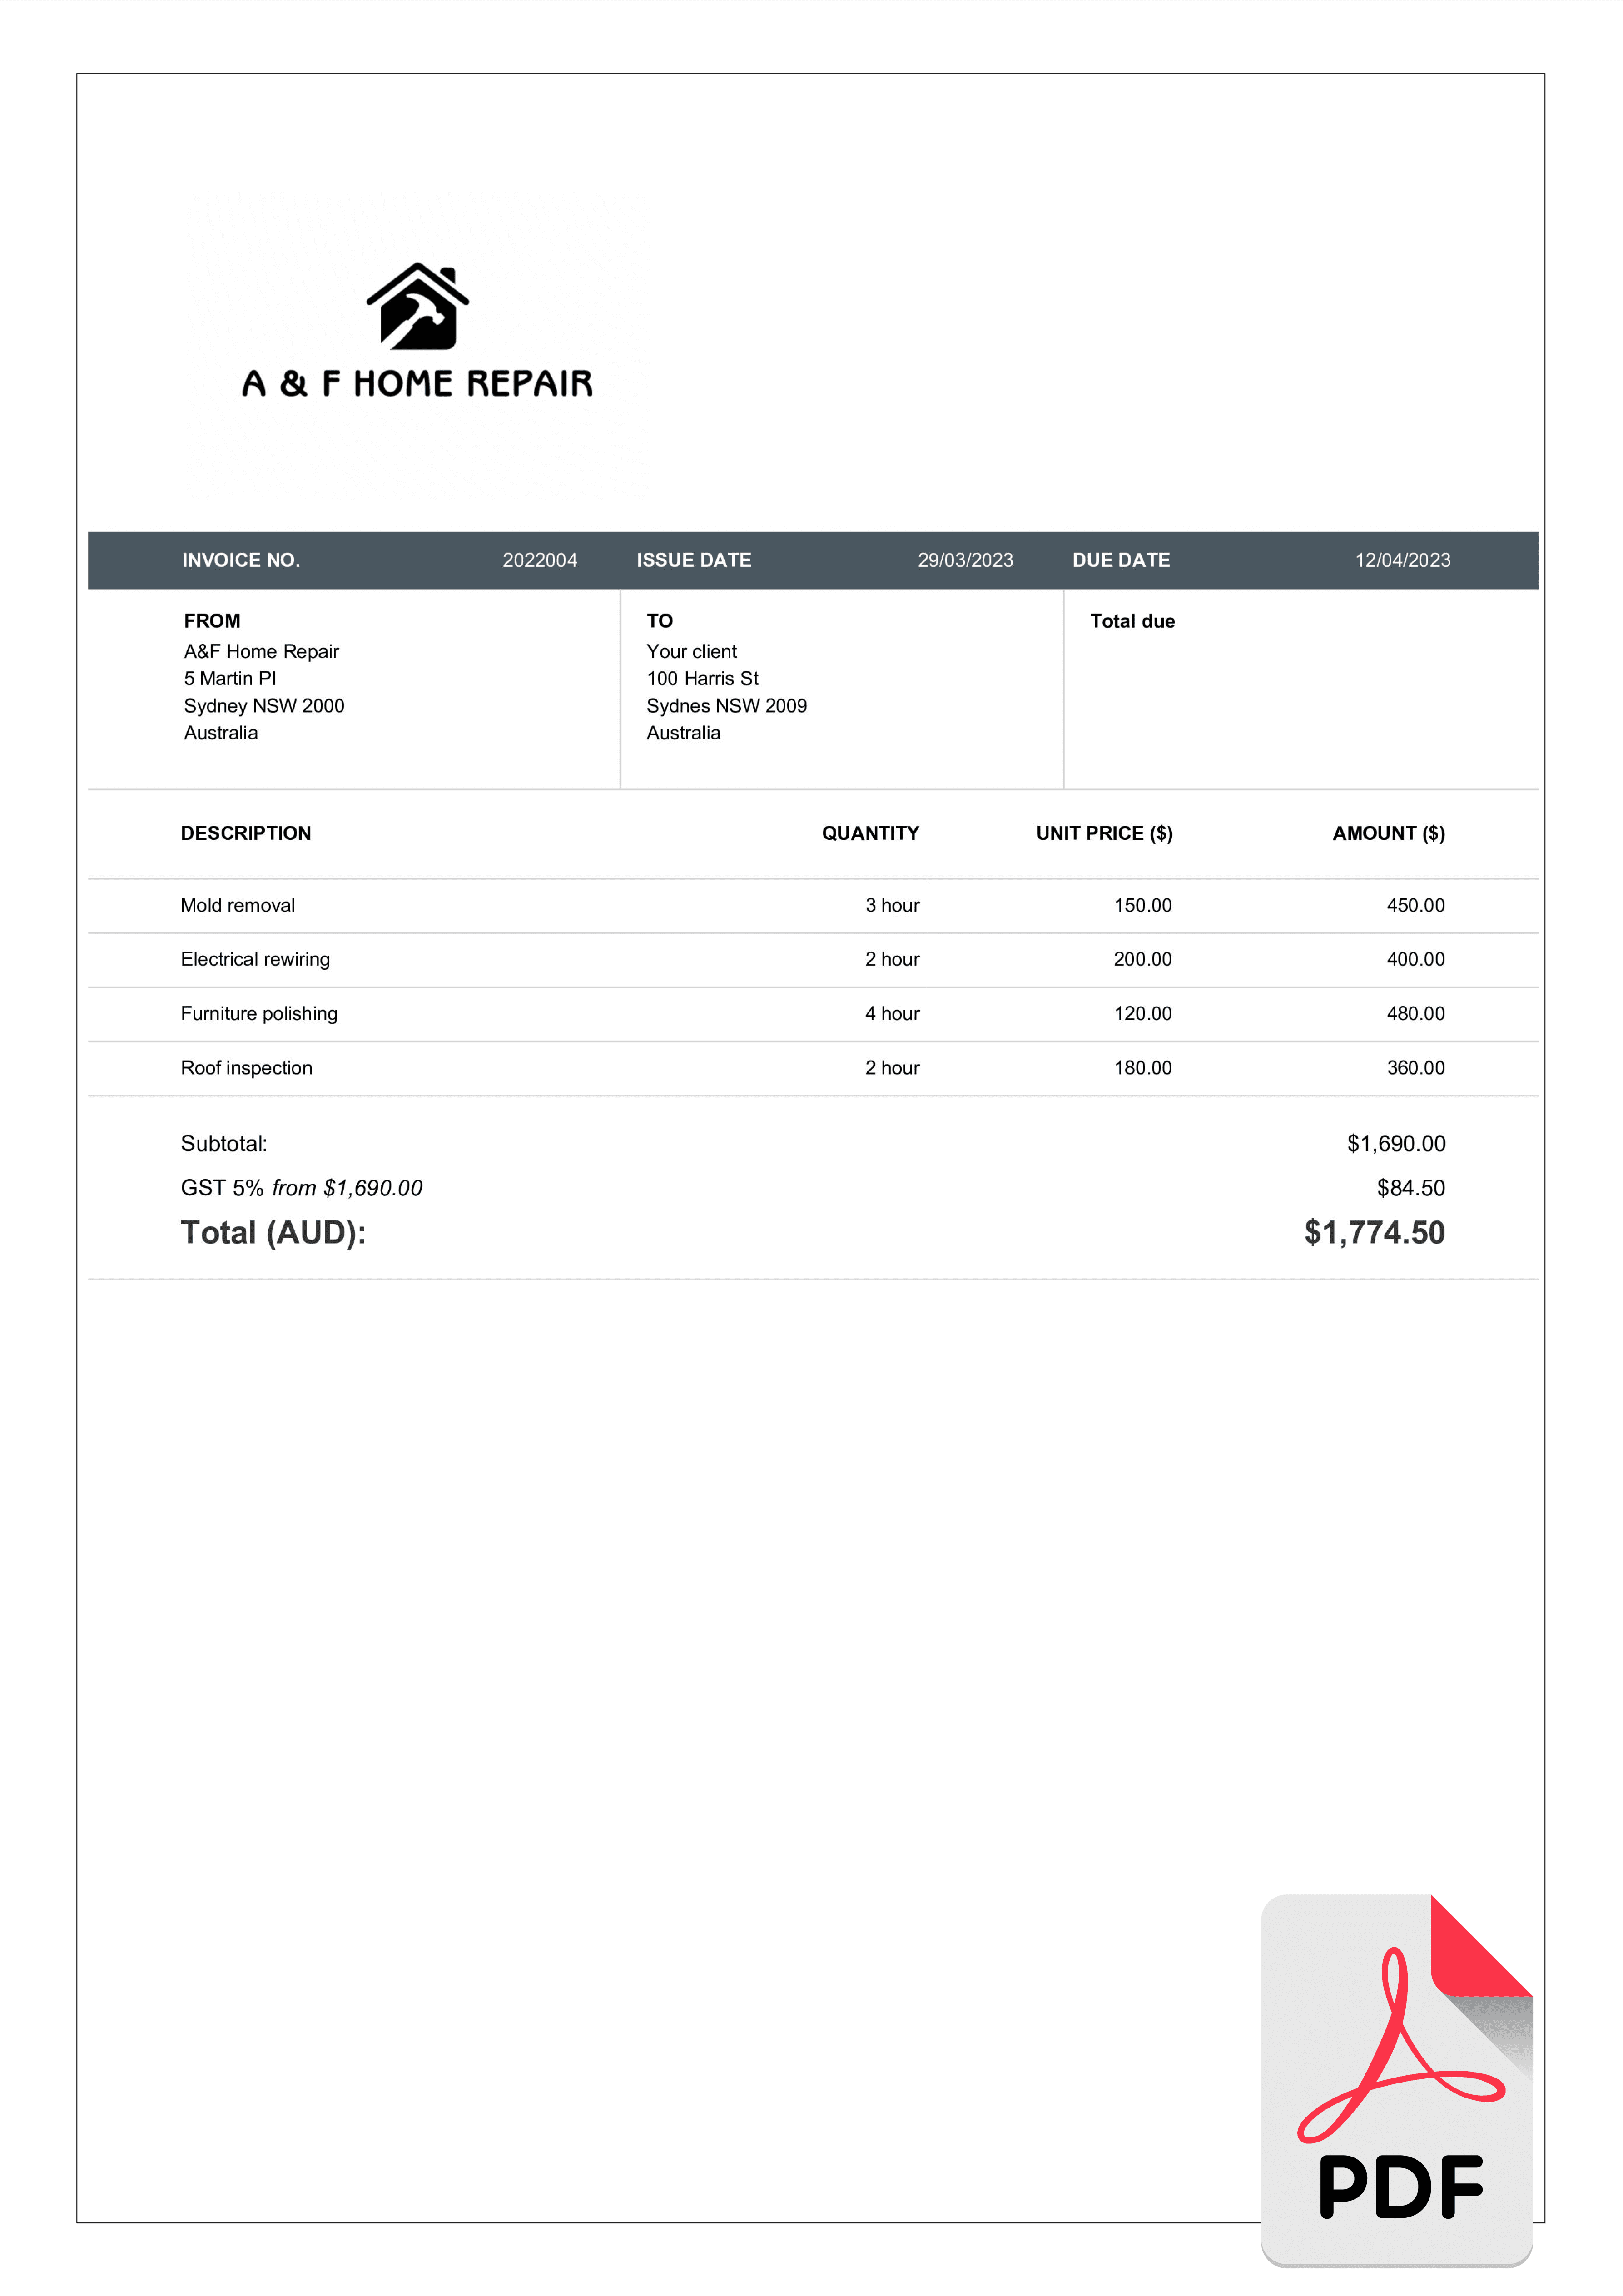 download pdf construction invoice layout